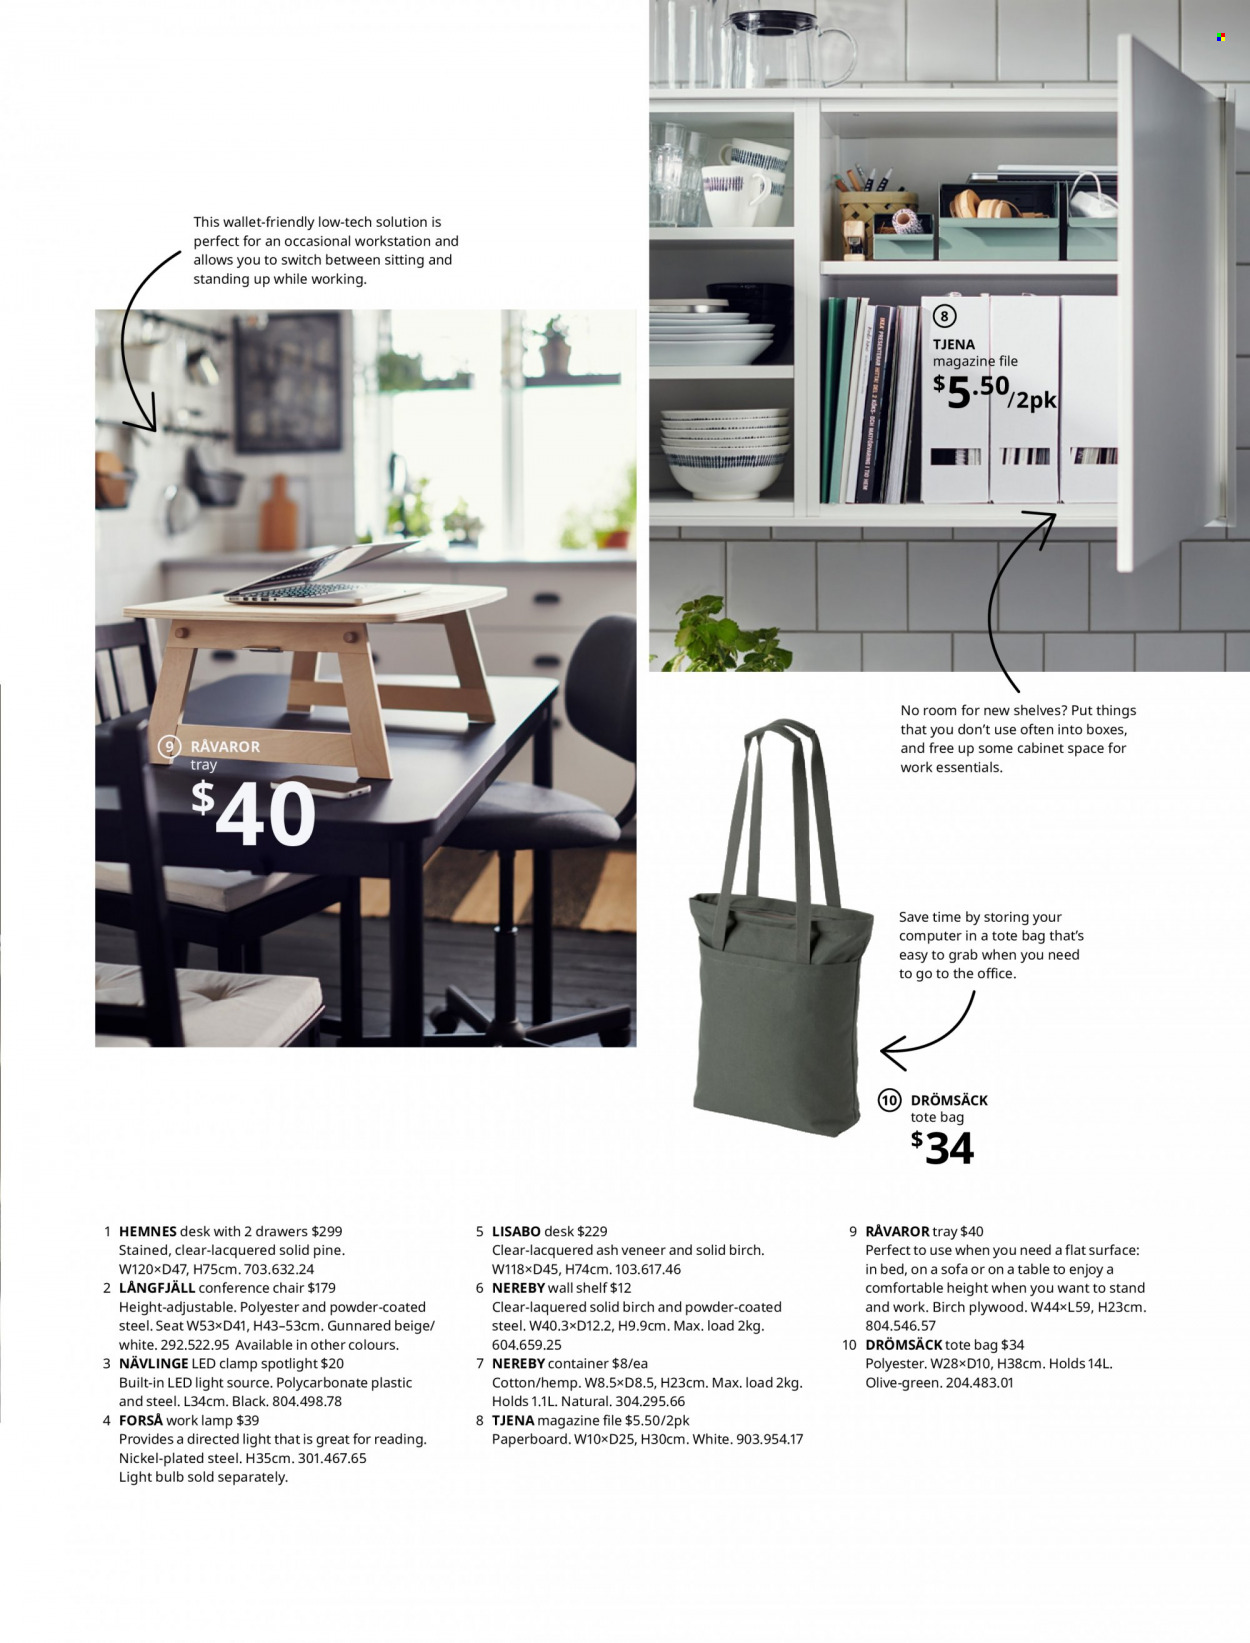 thumbnail - IKEA Catalogue - Sales products - cabinet, Hemnes, table, chair, Lack, sofa, shelf unit, wall shelf, desk, conference chair, container, tote, bag, light bulb, spotlight. Page 13.